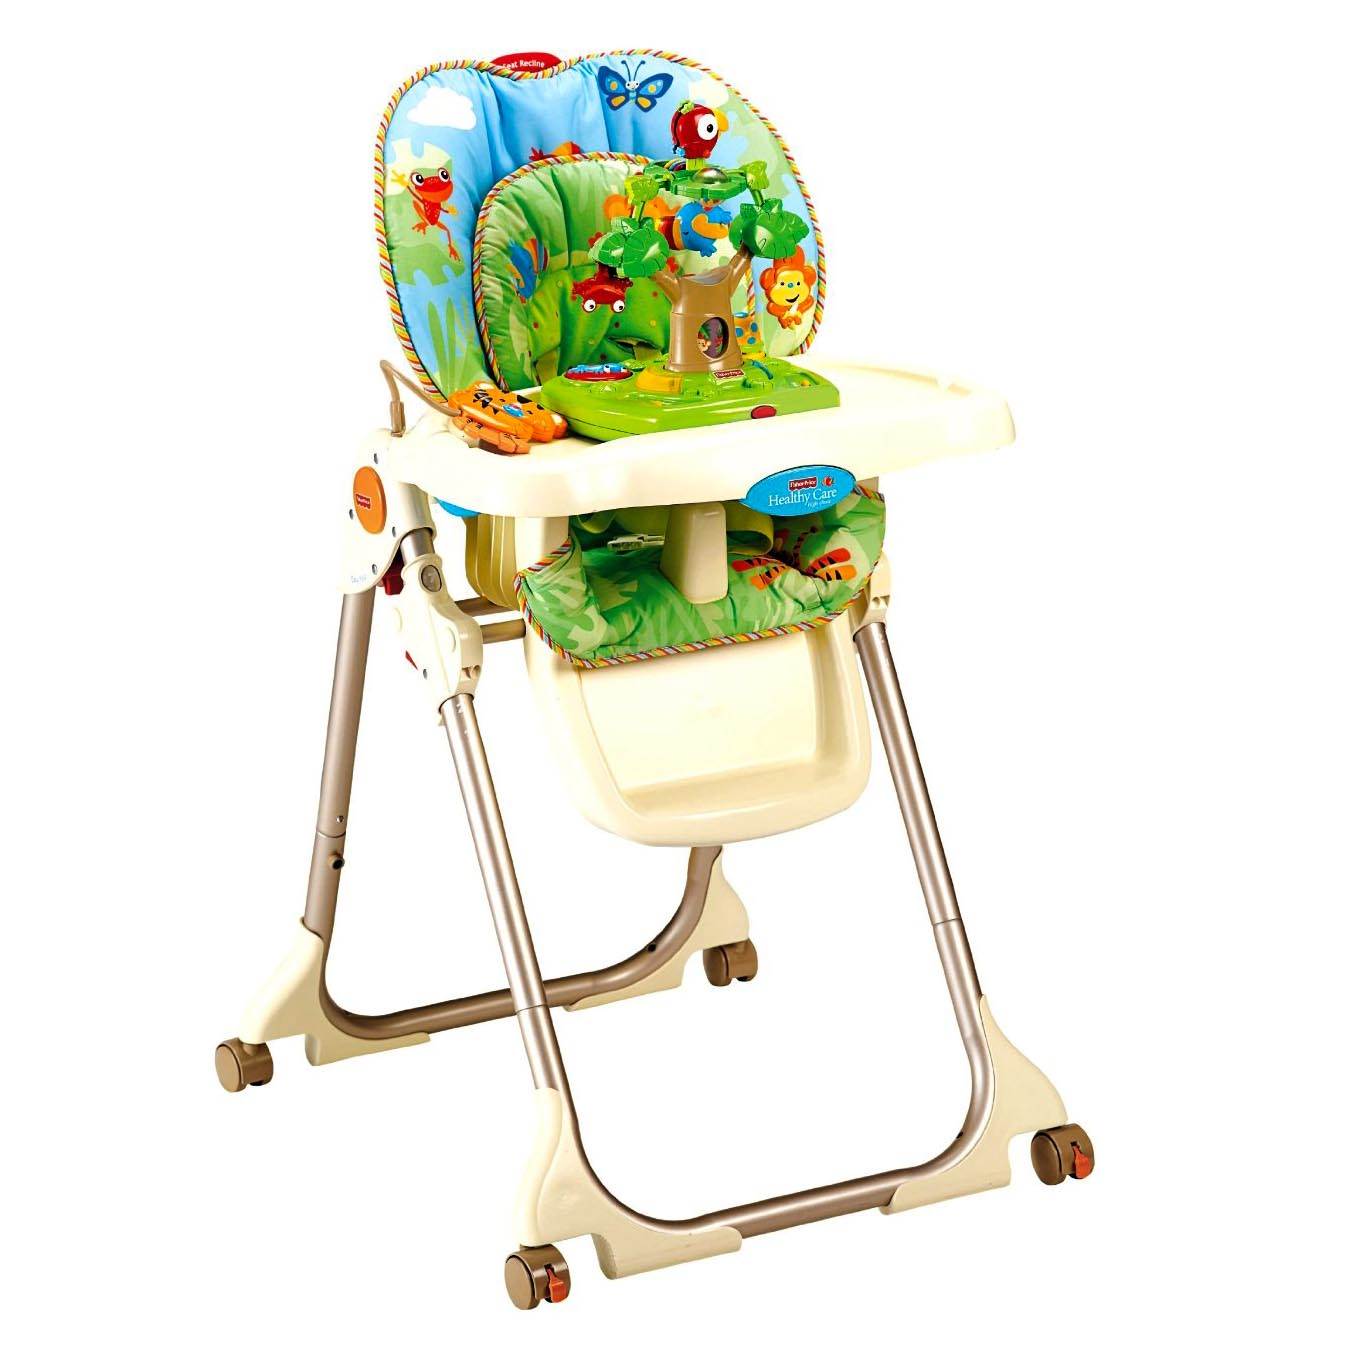 Fisher Price Rainforest Healthy Care High Chair with Dishwasher Safe Tray W3066 - image 4 of 5